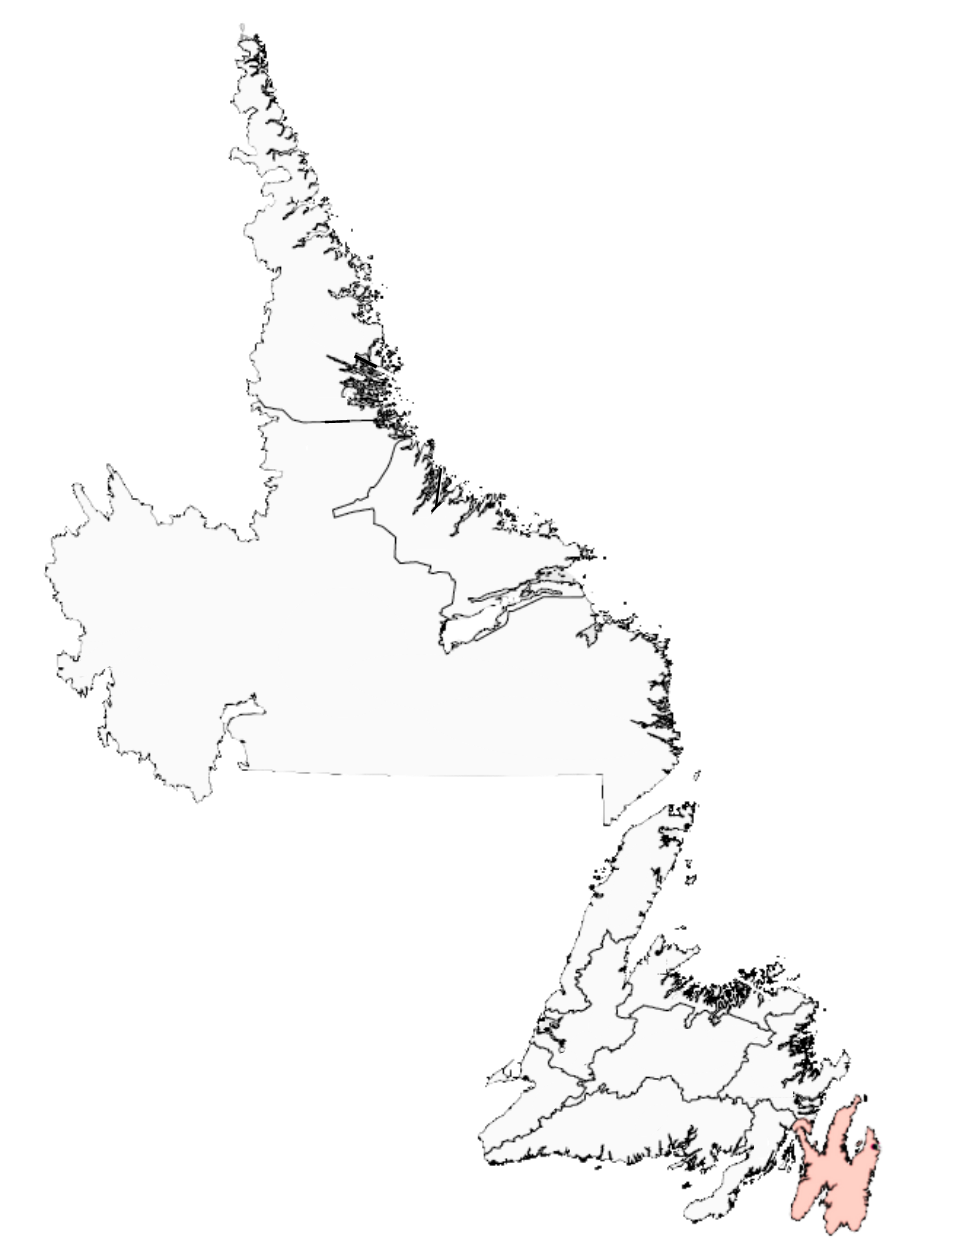 NL map with Avalon peninsula highlighted